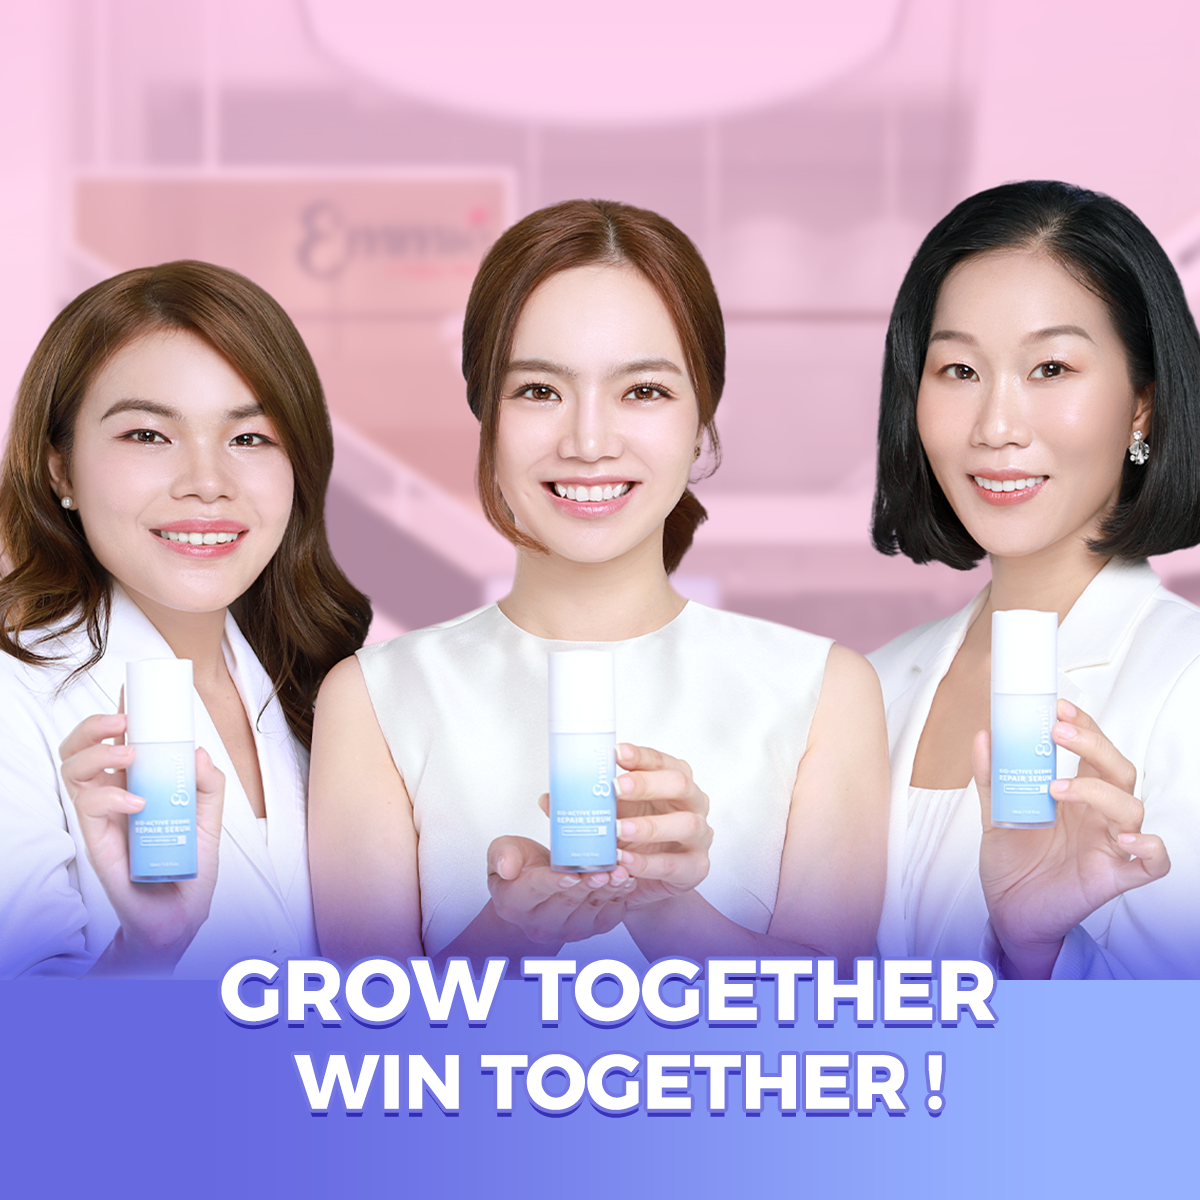 Grow together, win together